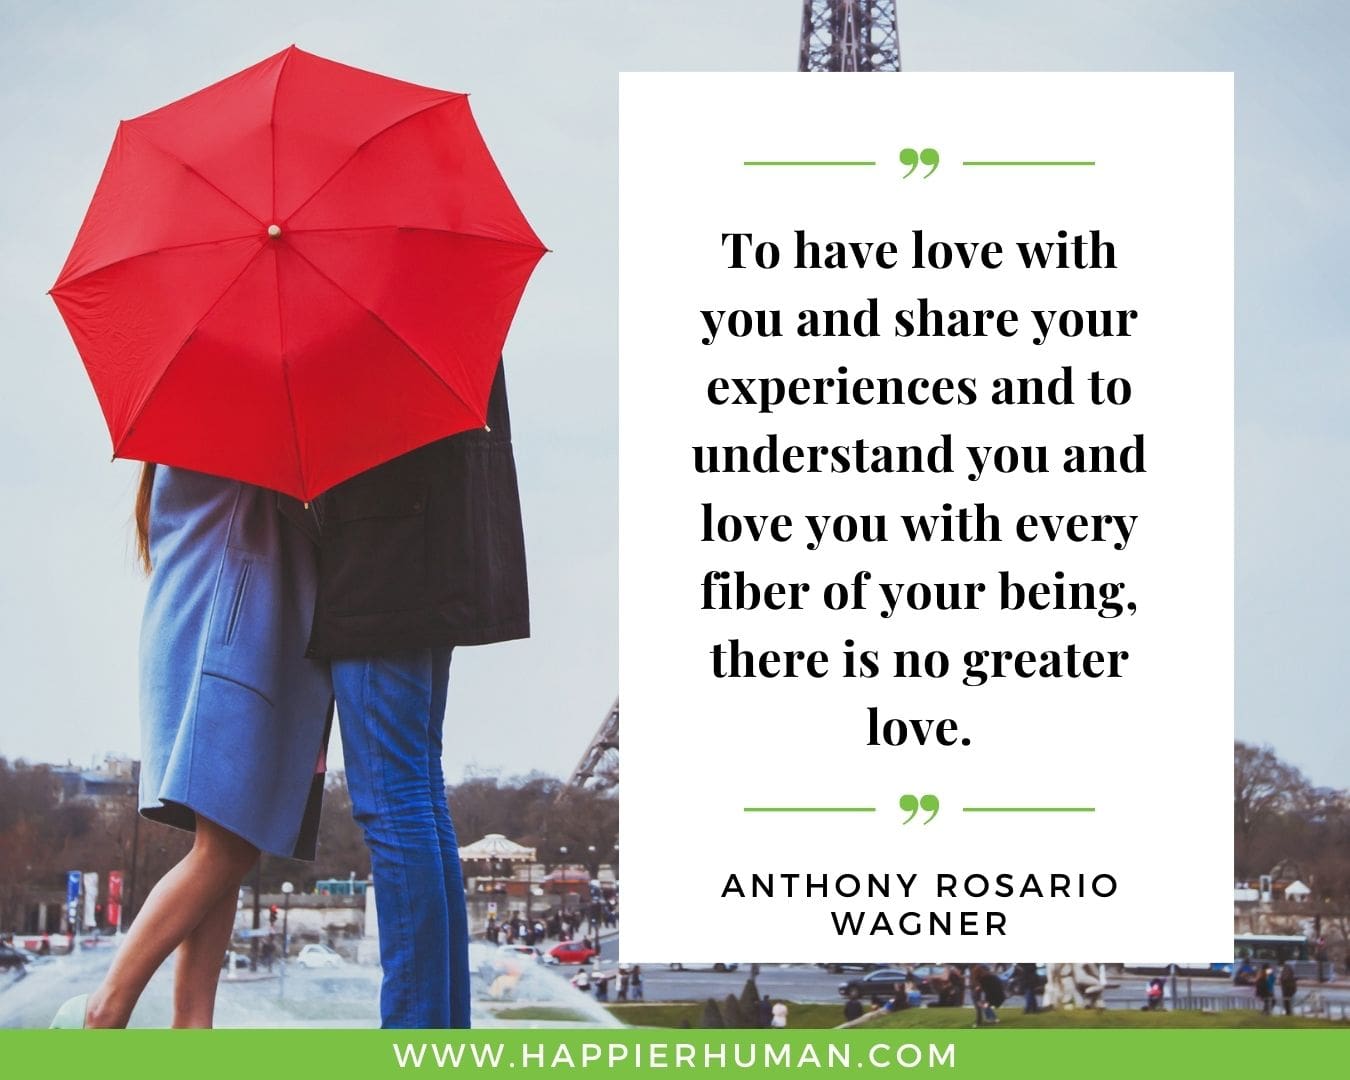 I’m Here for You Quotes - “To have love with you and share your experiences and to understand you and love you with every fiber of your being, there is no greater love.” – Anthony Rosario Wagner